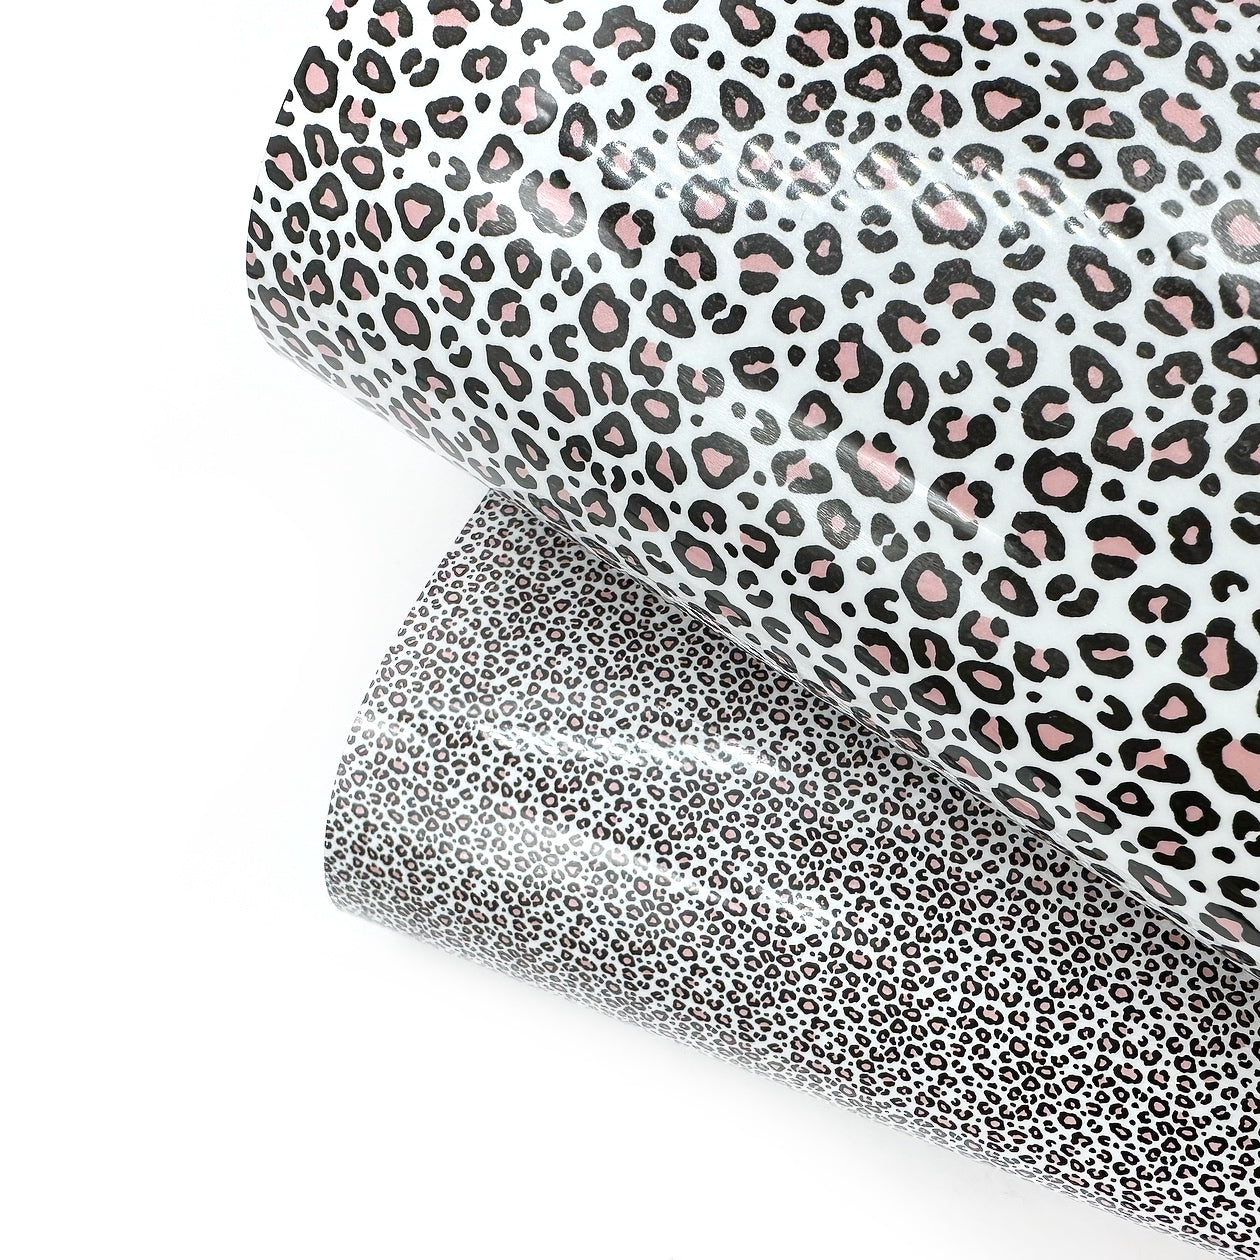 Wild One Leopard EH Printed Patterned Craft HTV Plain Vinyl